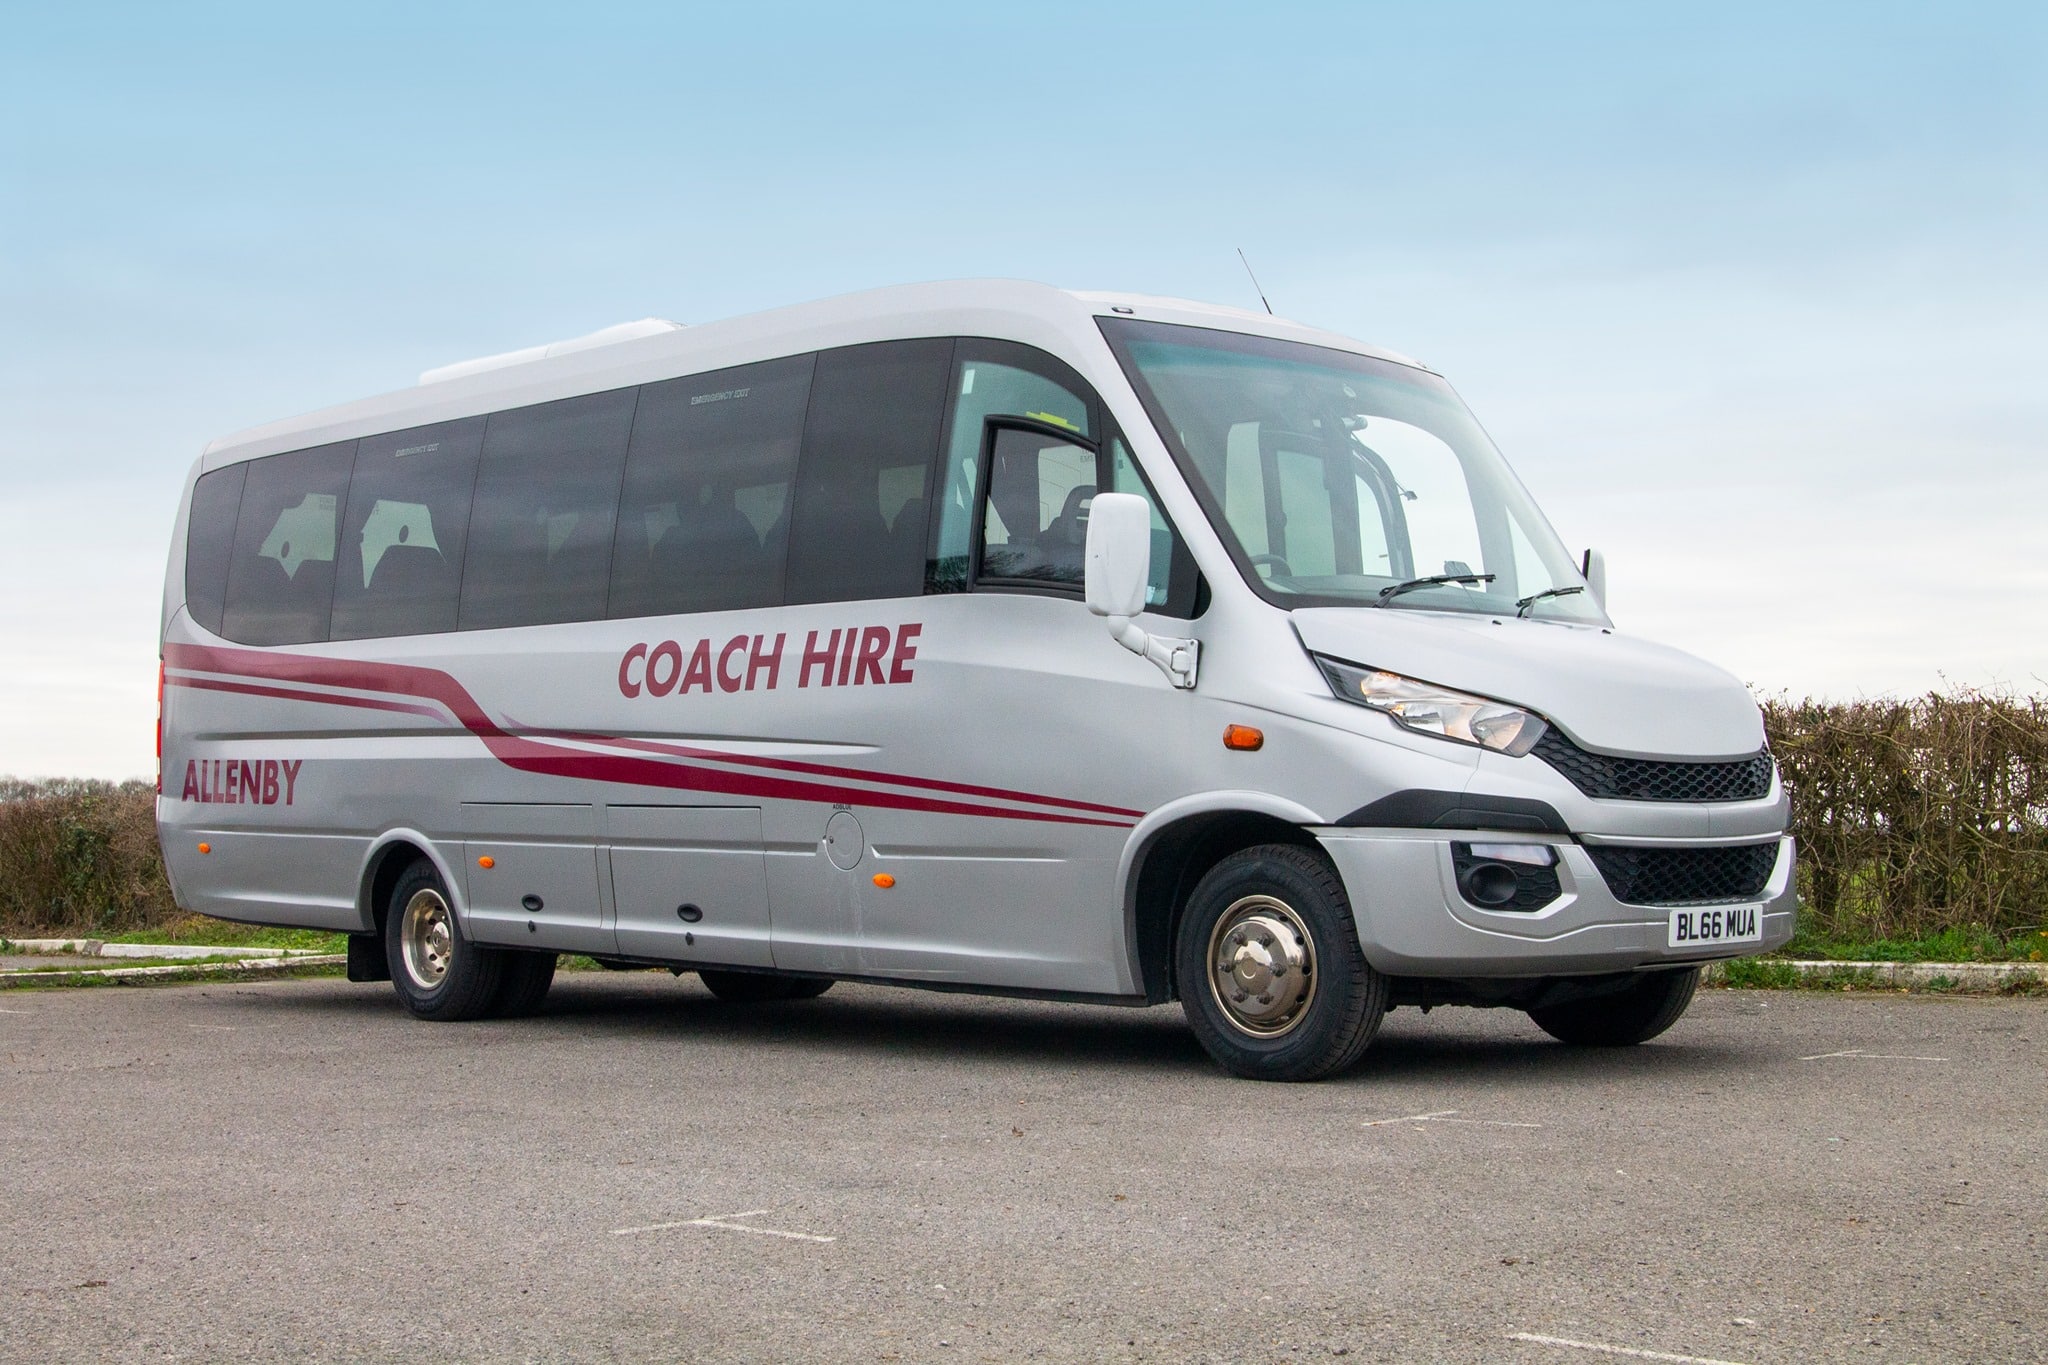 coach trips for families